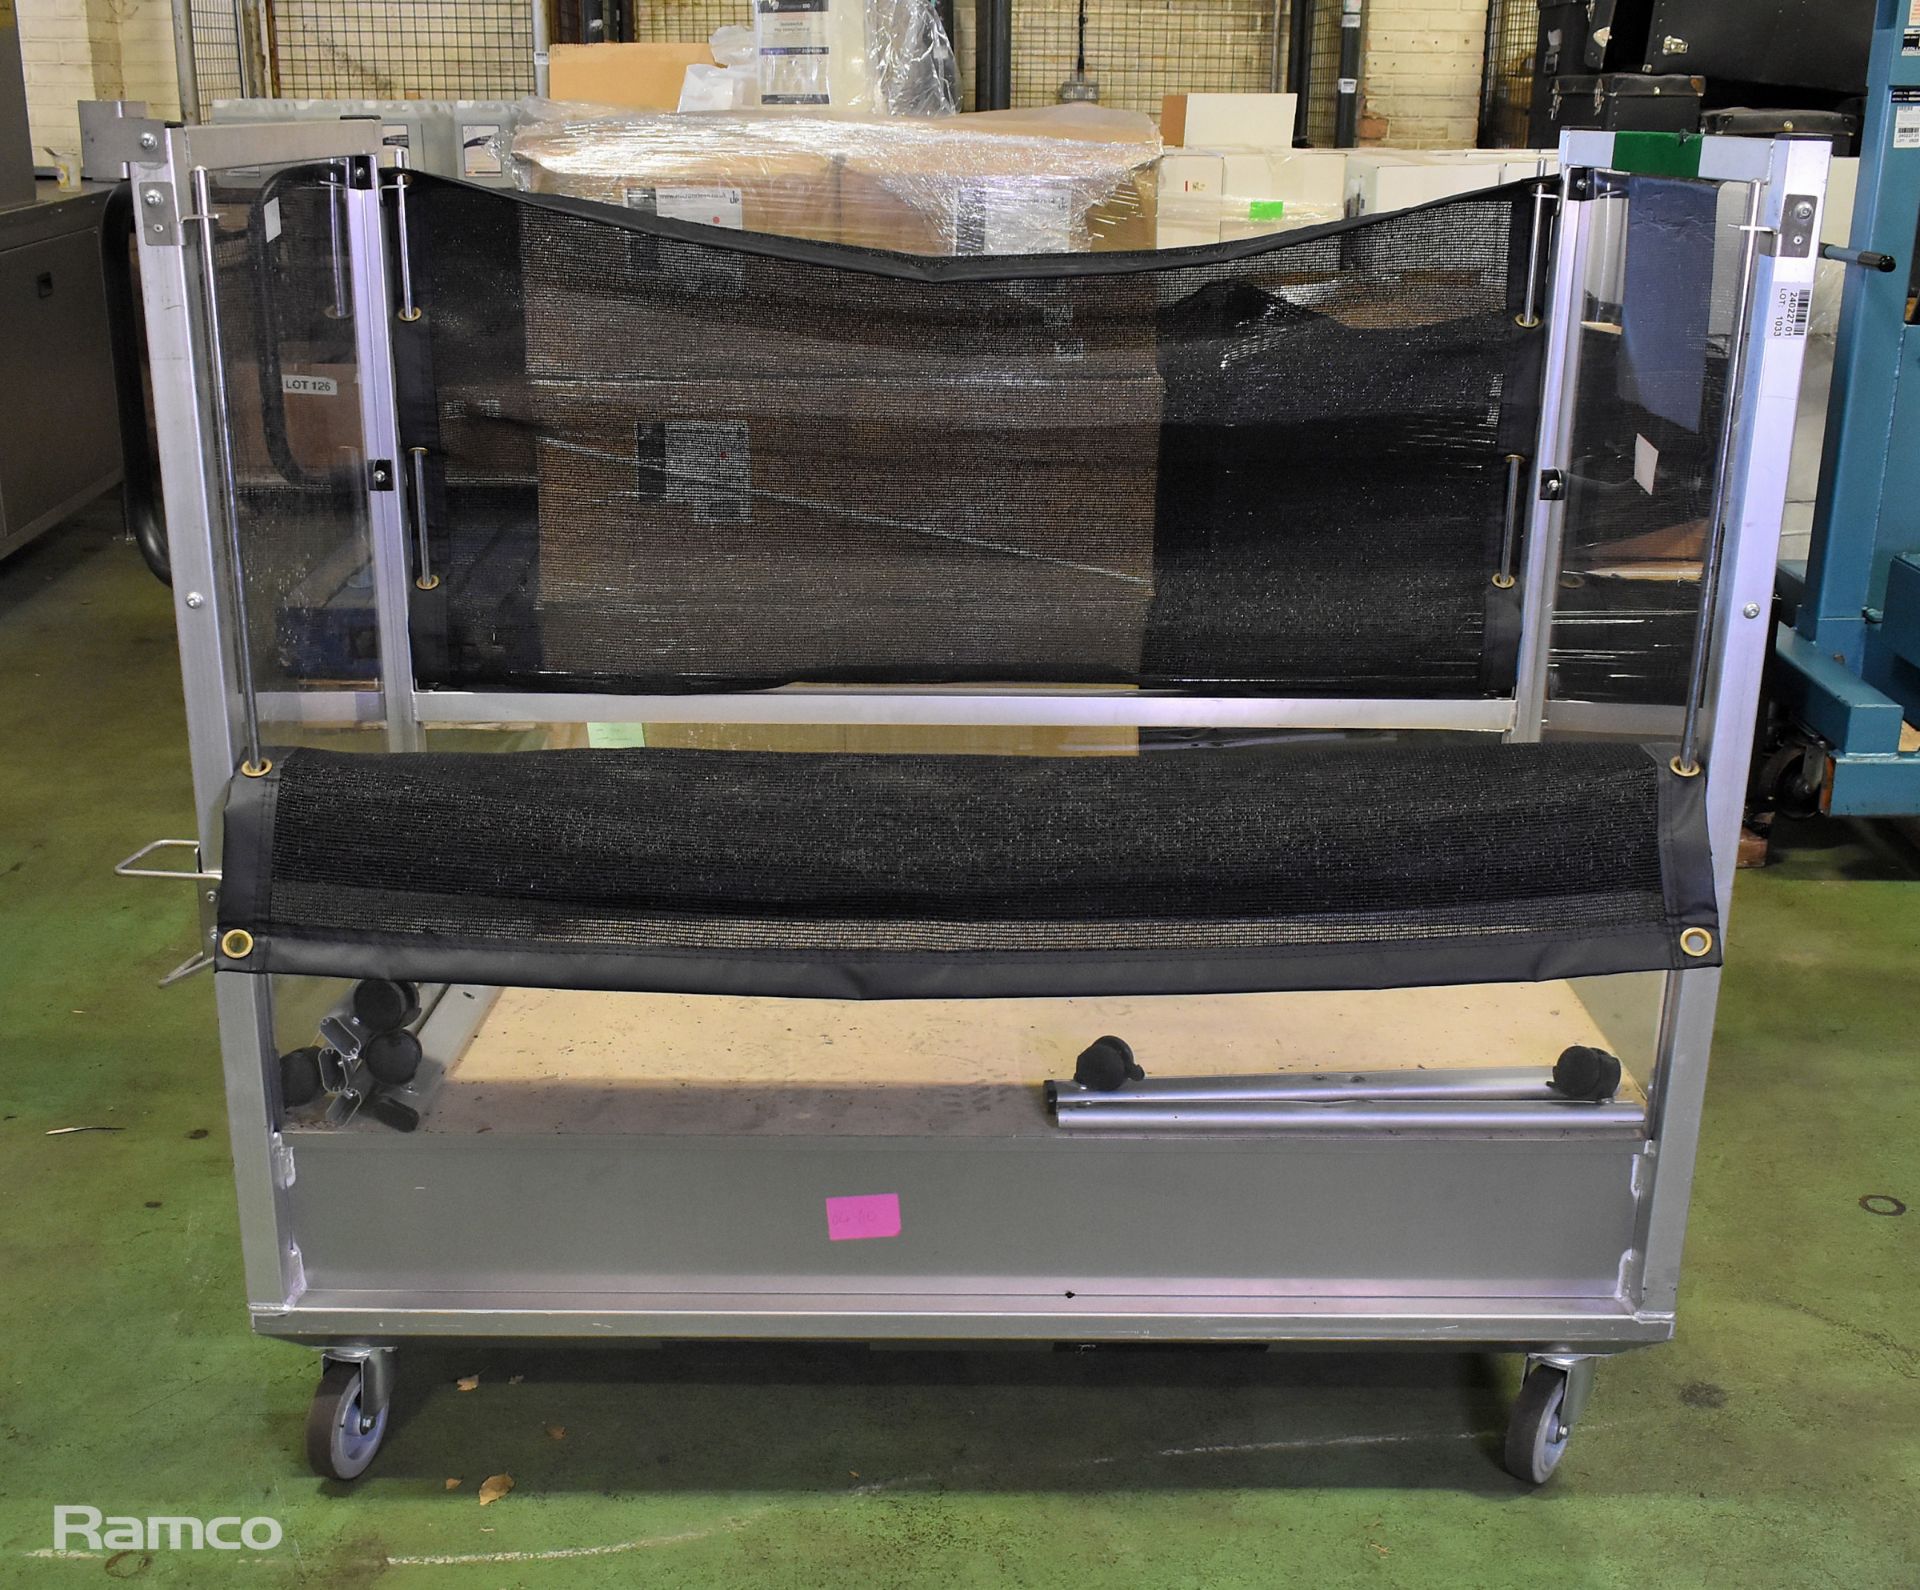 Metal trolley with mesh curtains - W 1500 x D 750 x H 1400mm